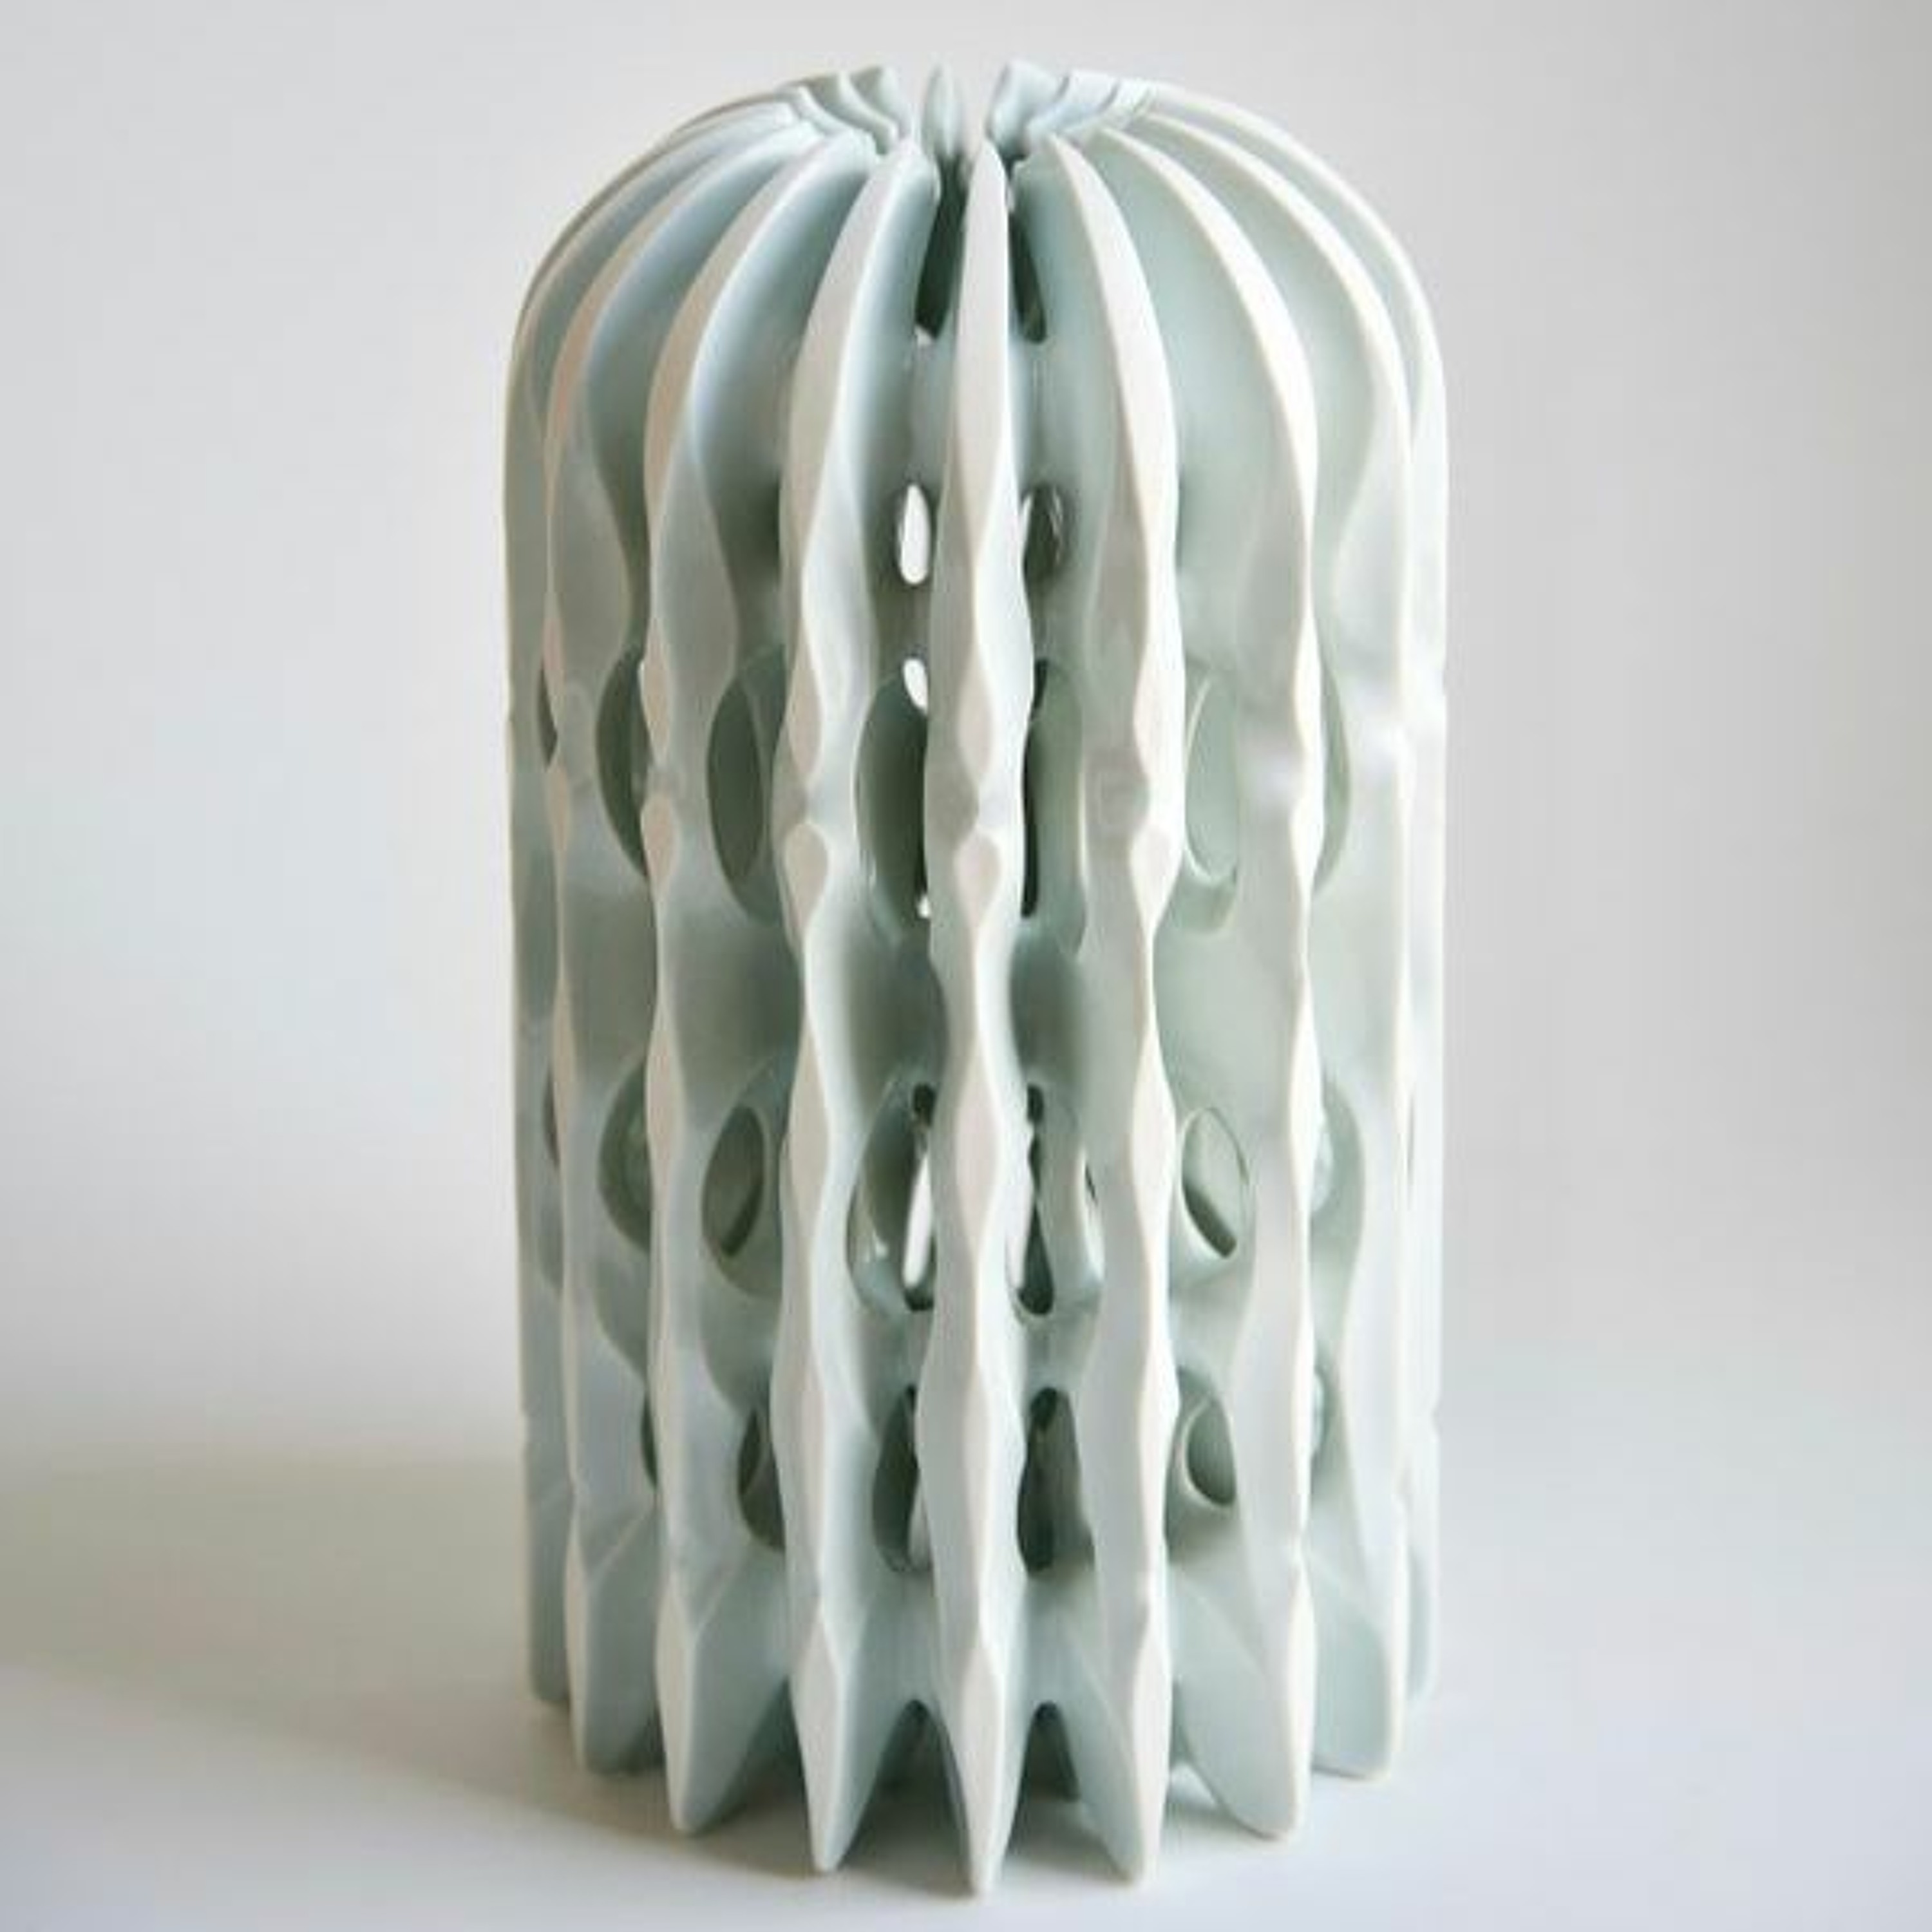 Tuesday Talk - Russell Kelty in conversation with Pure Form ceramic artist Kenji Uranishi